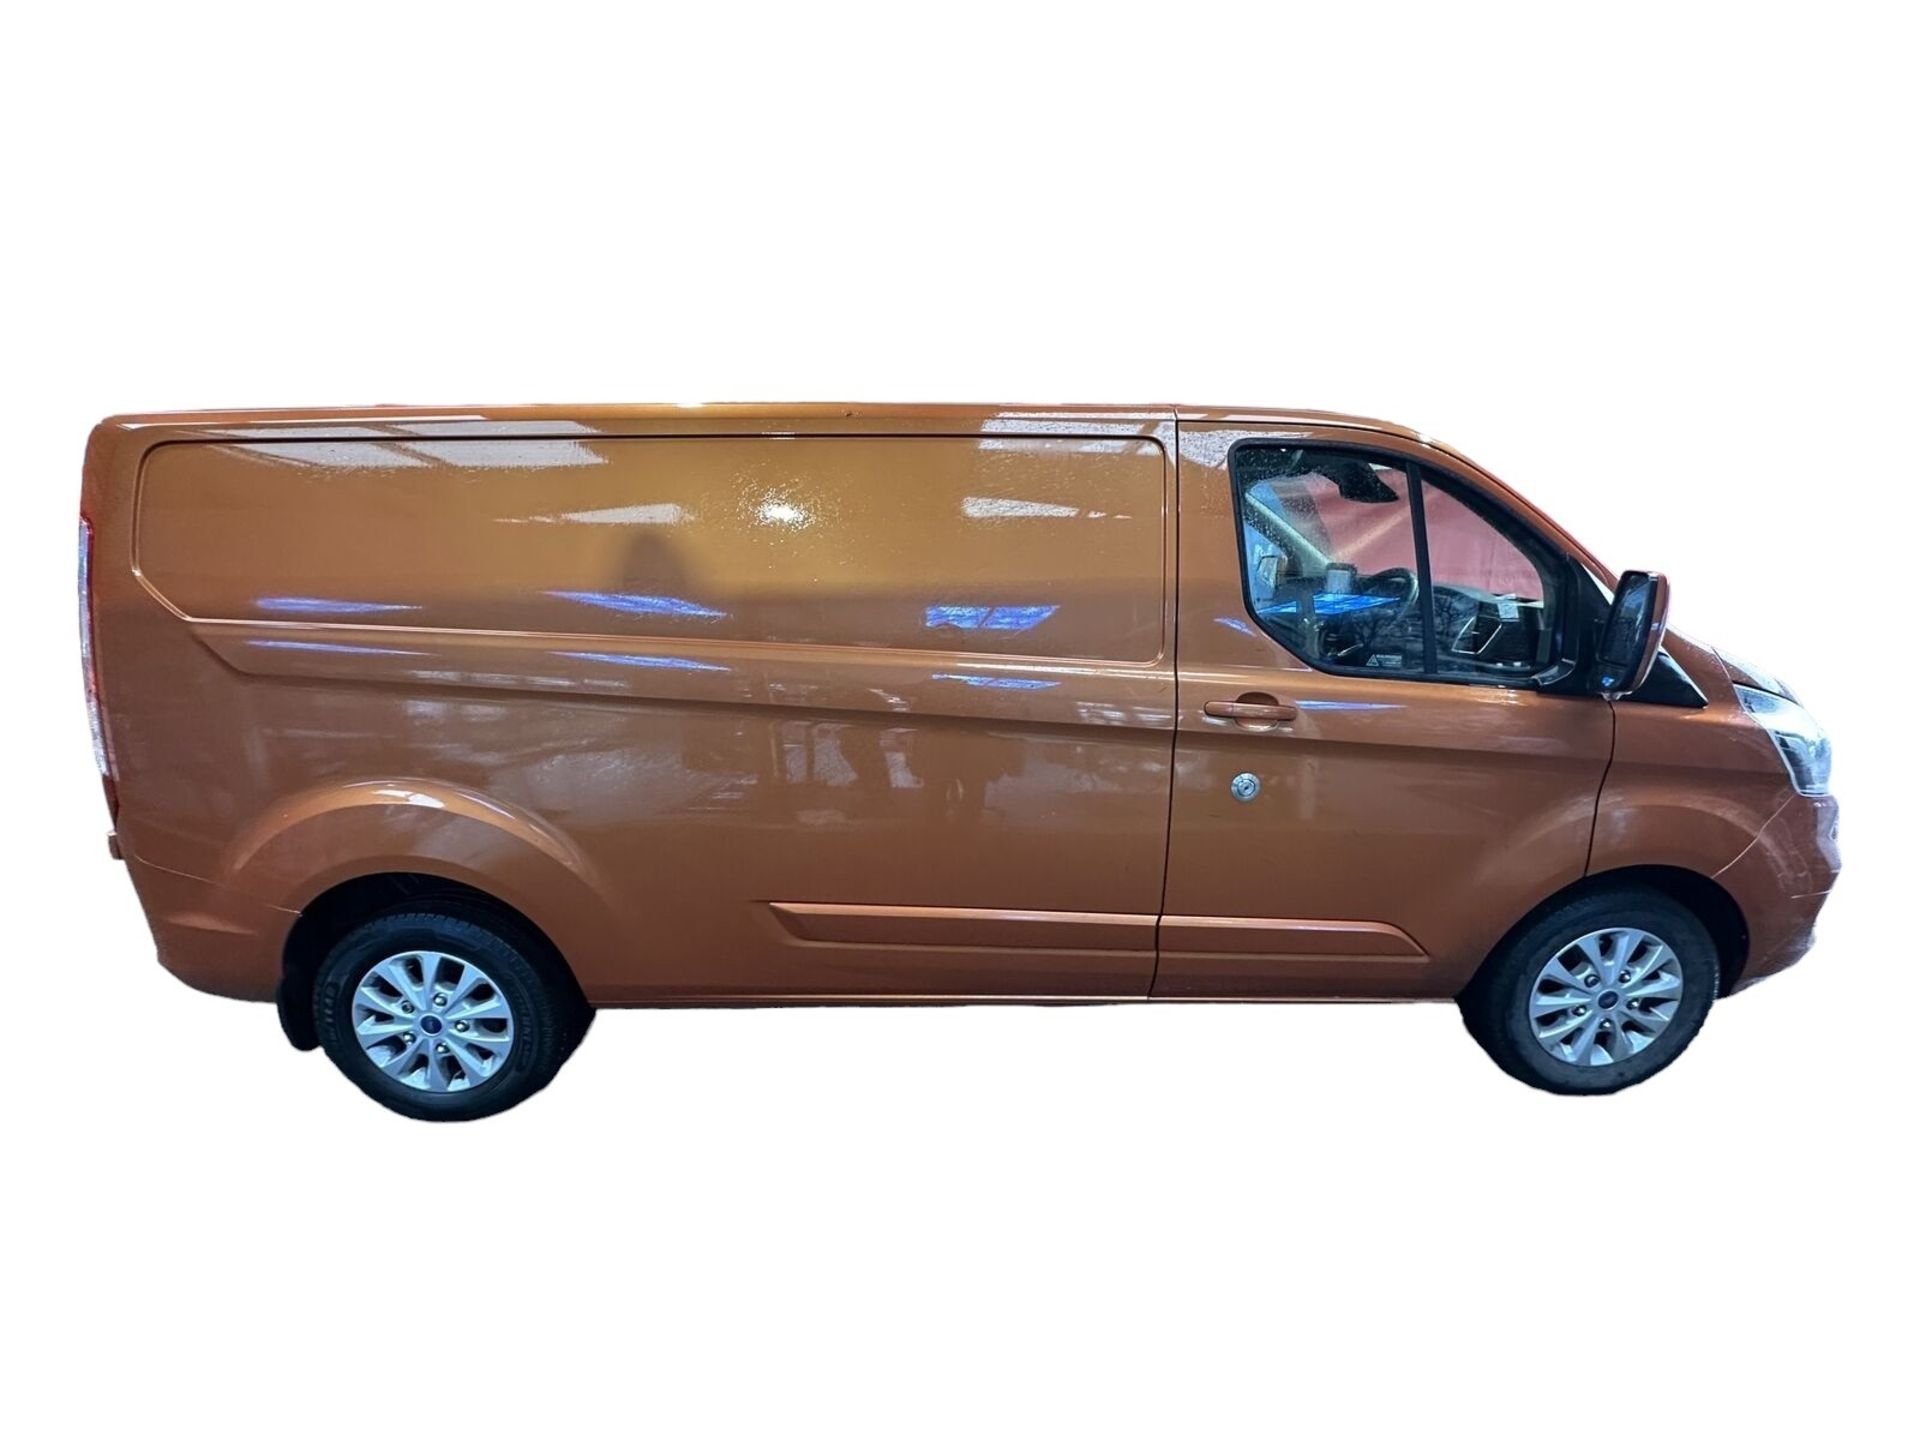 2021 FORD TRANSIT CUSTOM AUTO - WELL-MAINTAINED PERFECTION >>--NO VAT ON HAMMER--<< - Image 4 of 16